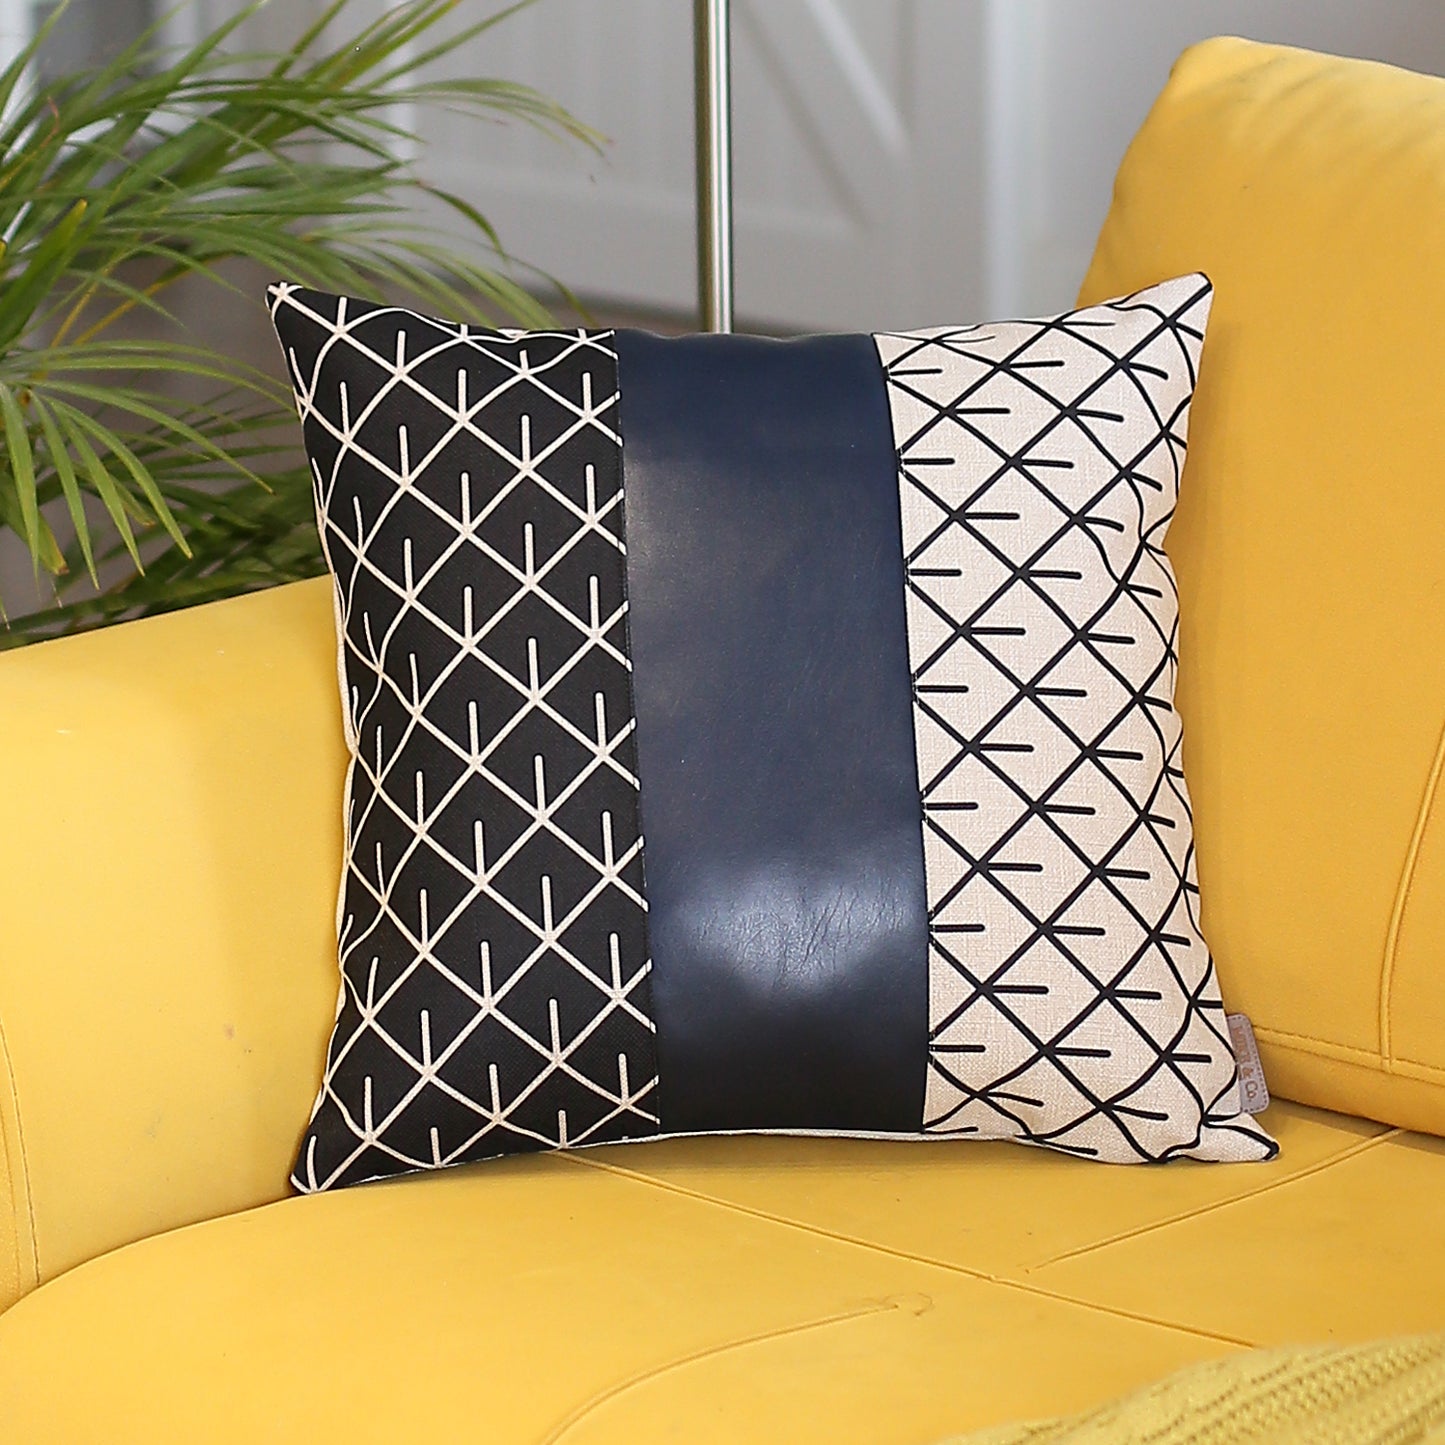 Boho Throw Pillow Navy Blue Mixed Design Set of 4 Vegan Faux Leather Geometric for Couch, Bedding